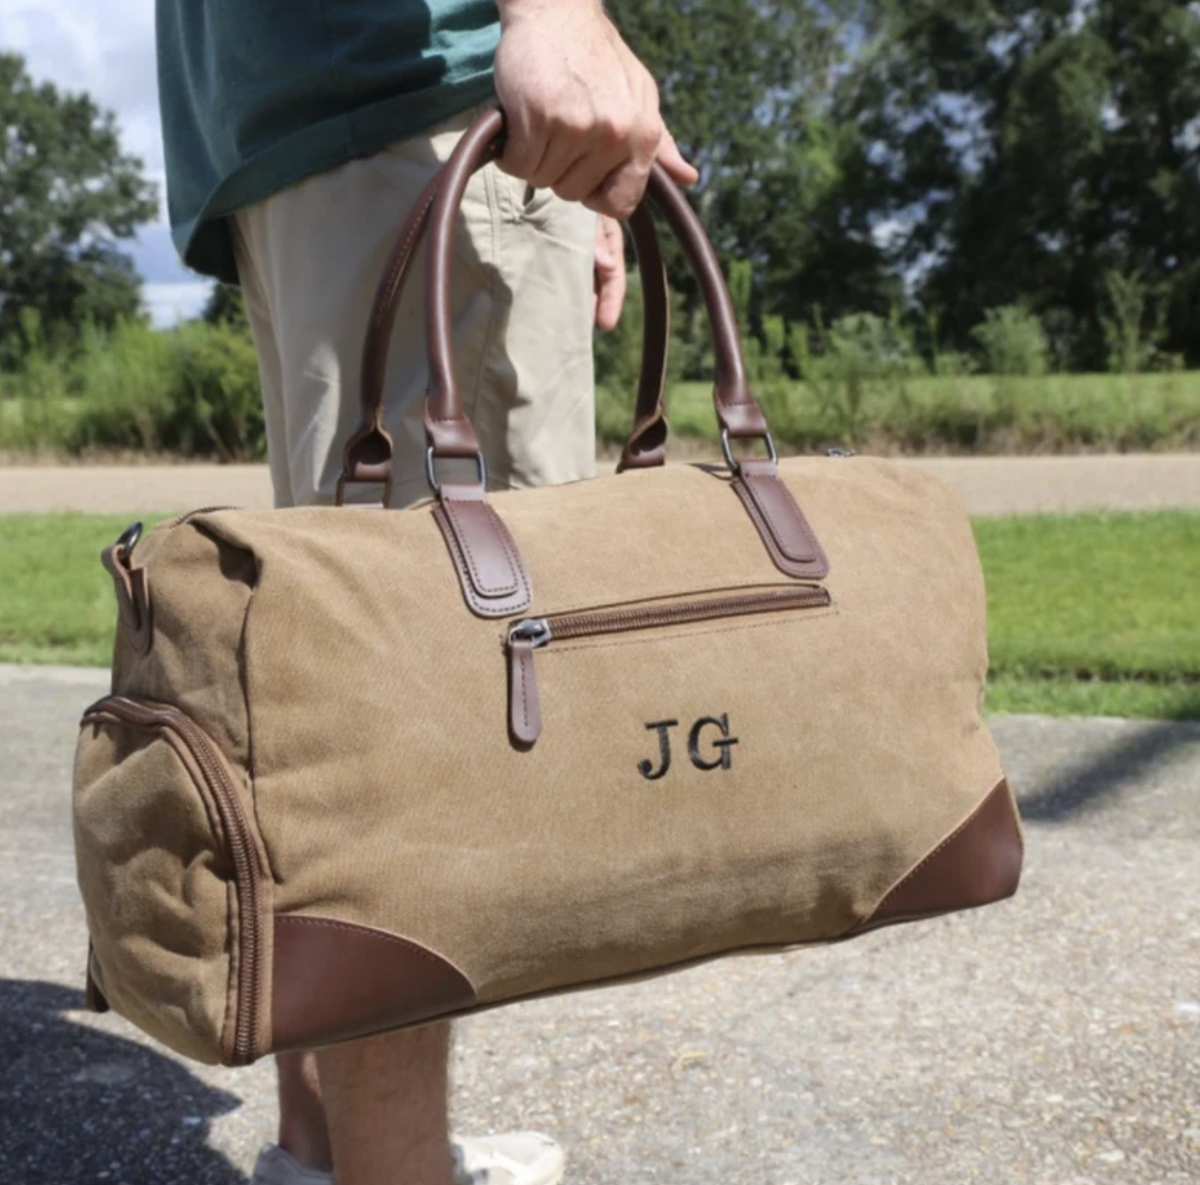 The Best Personalized Messenger Bag - GroomsDay